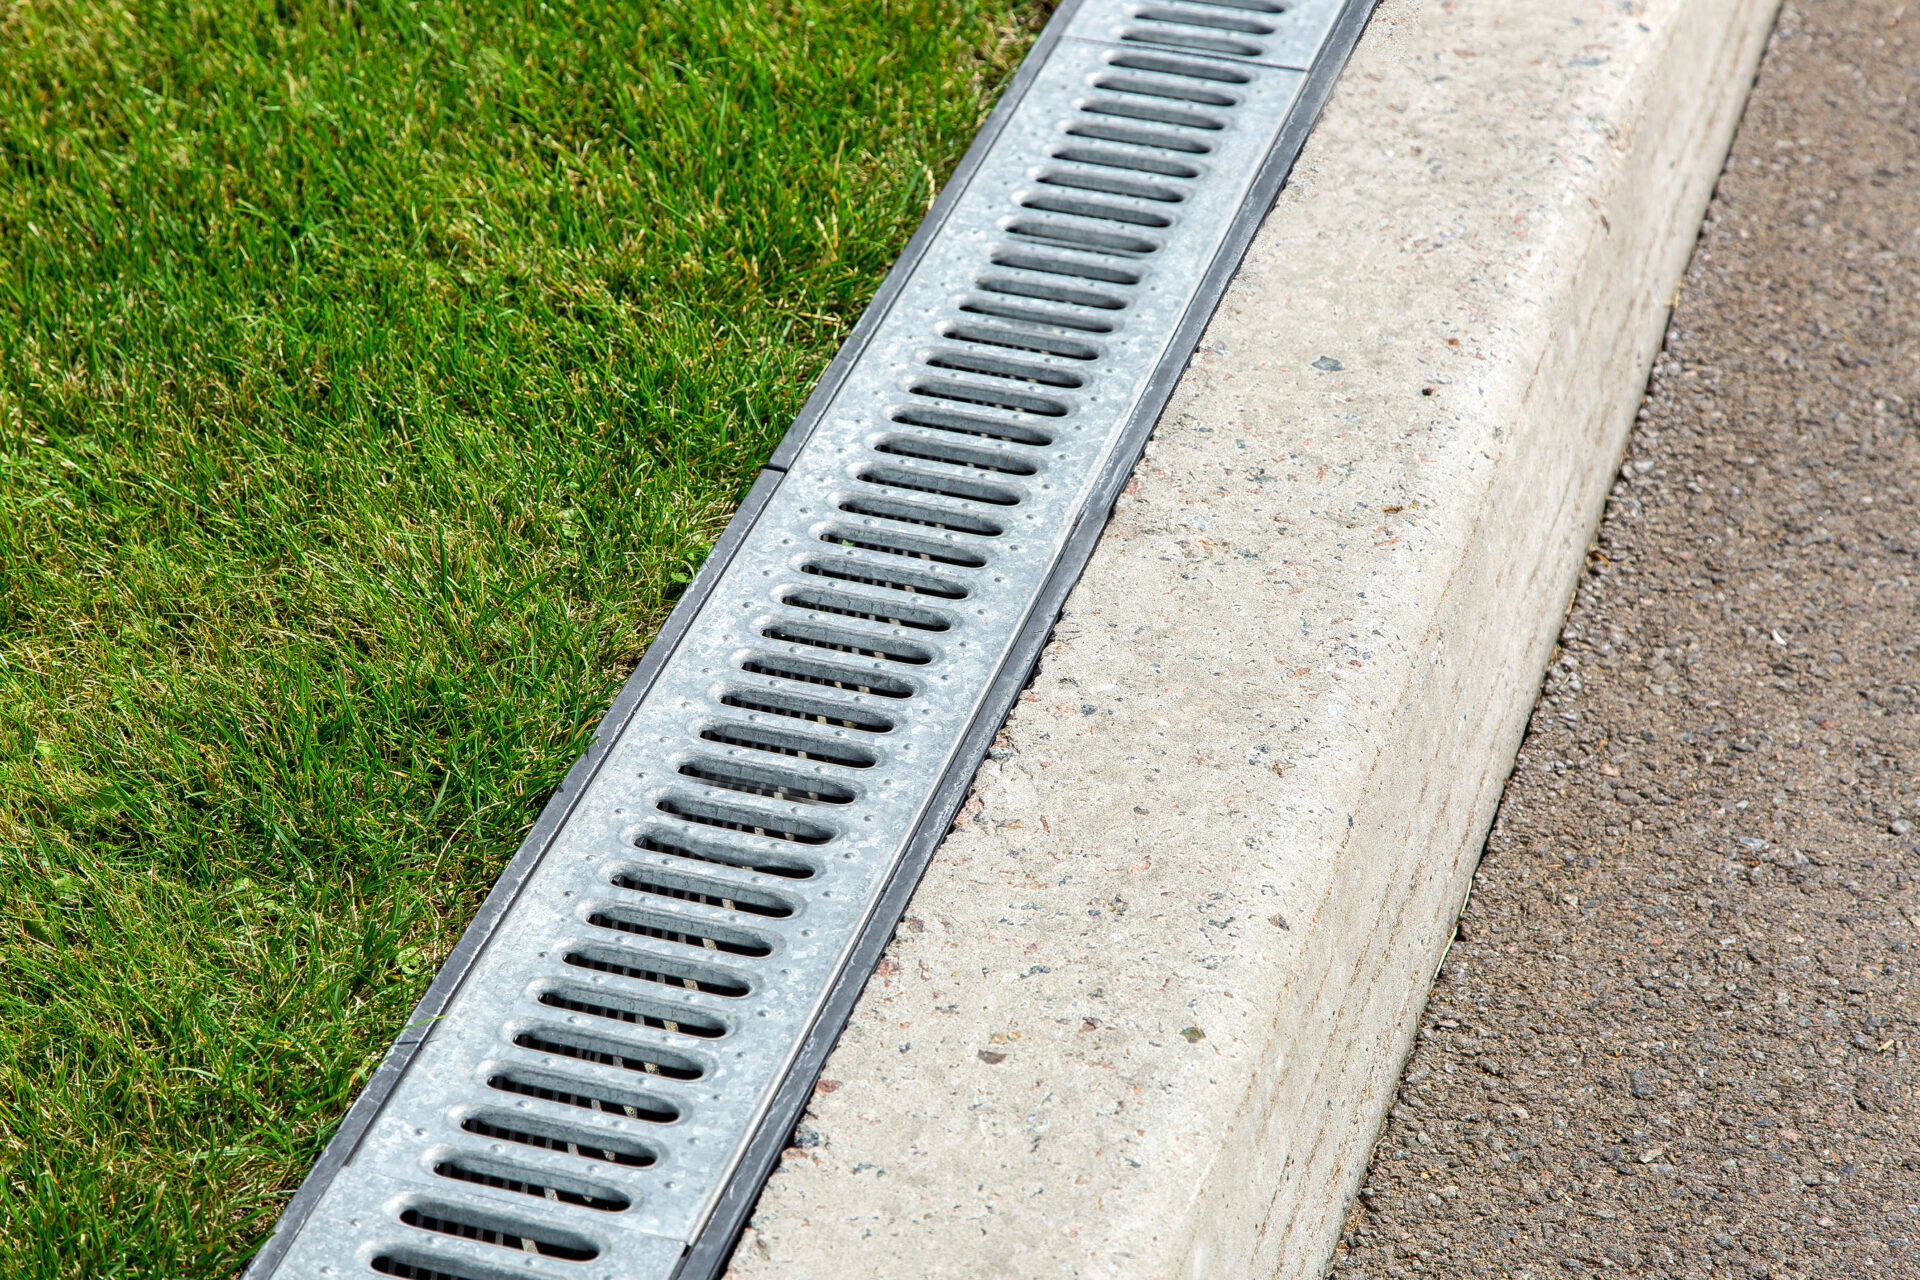 Close up of outdoor drainage in plumbing system along a asphalt road and green grass. MidCity Plumbers